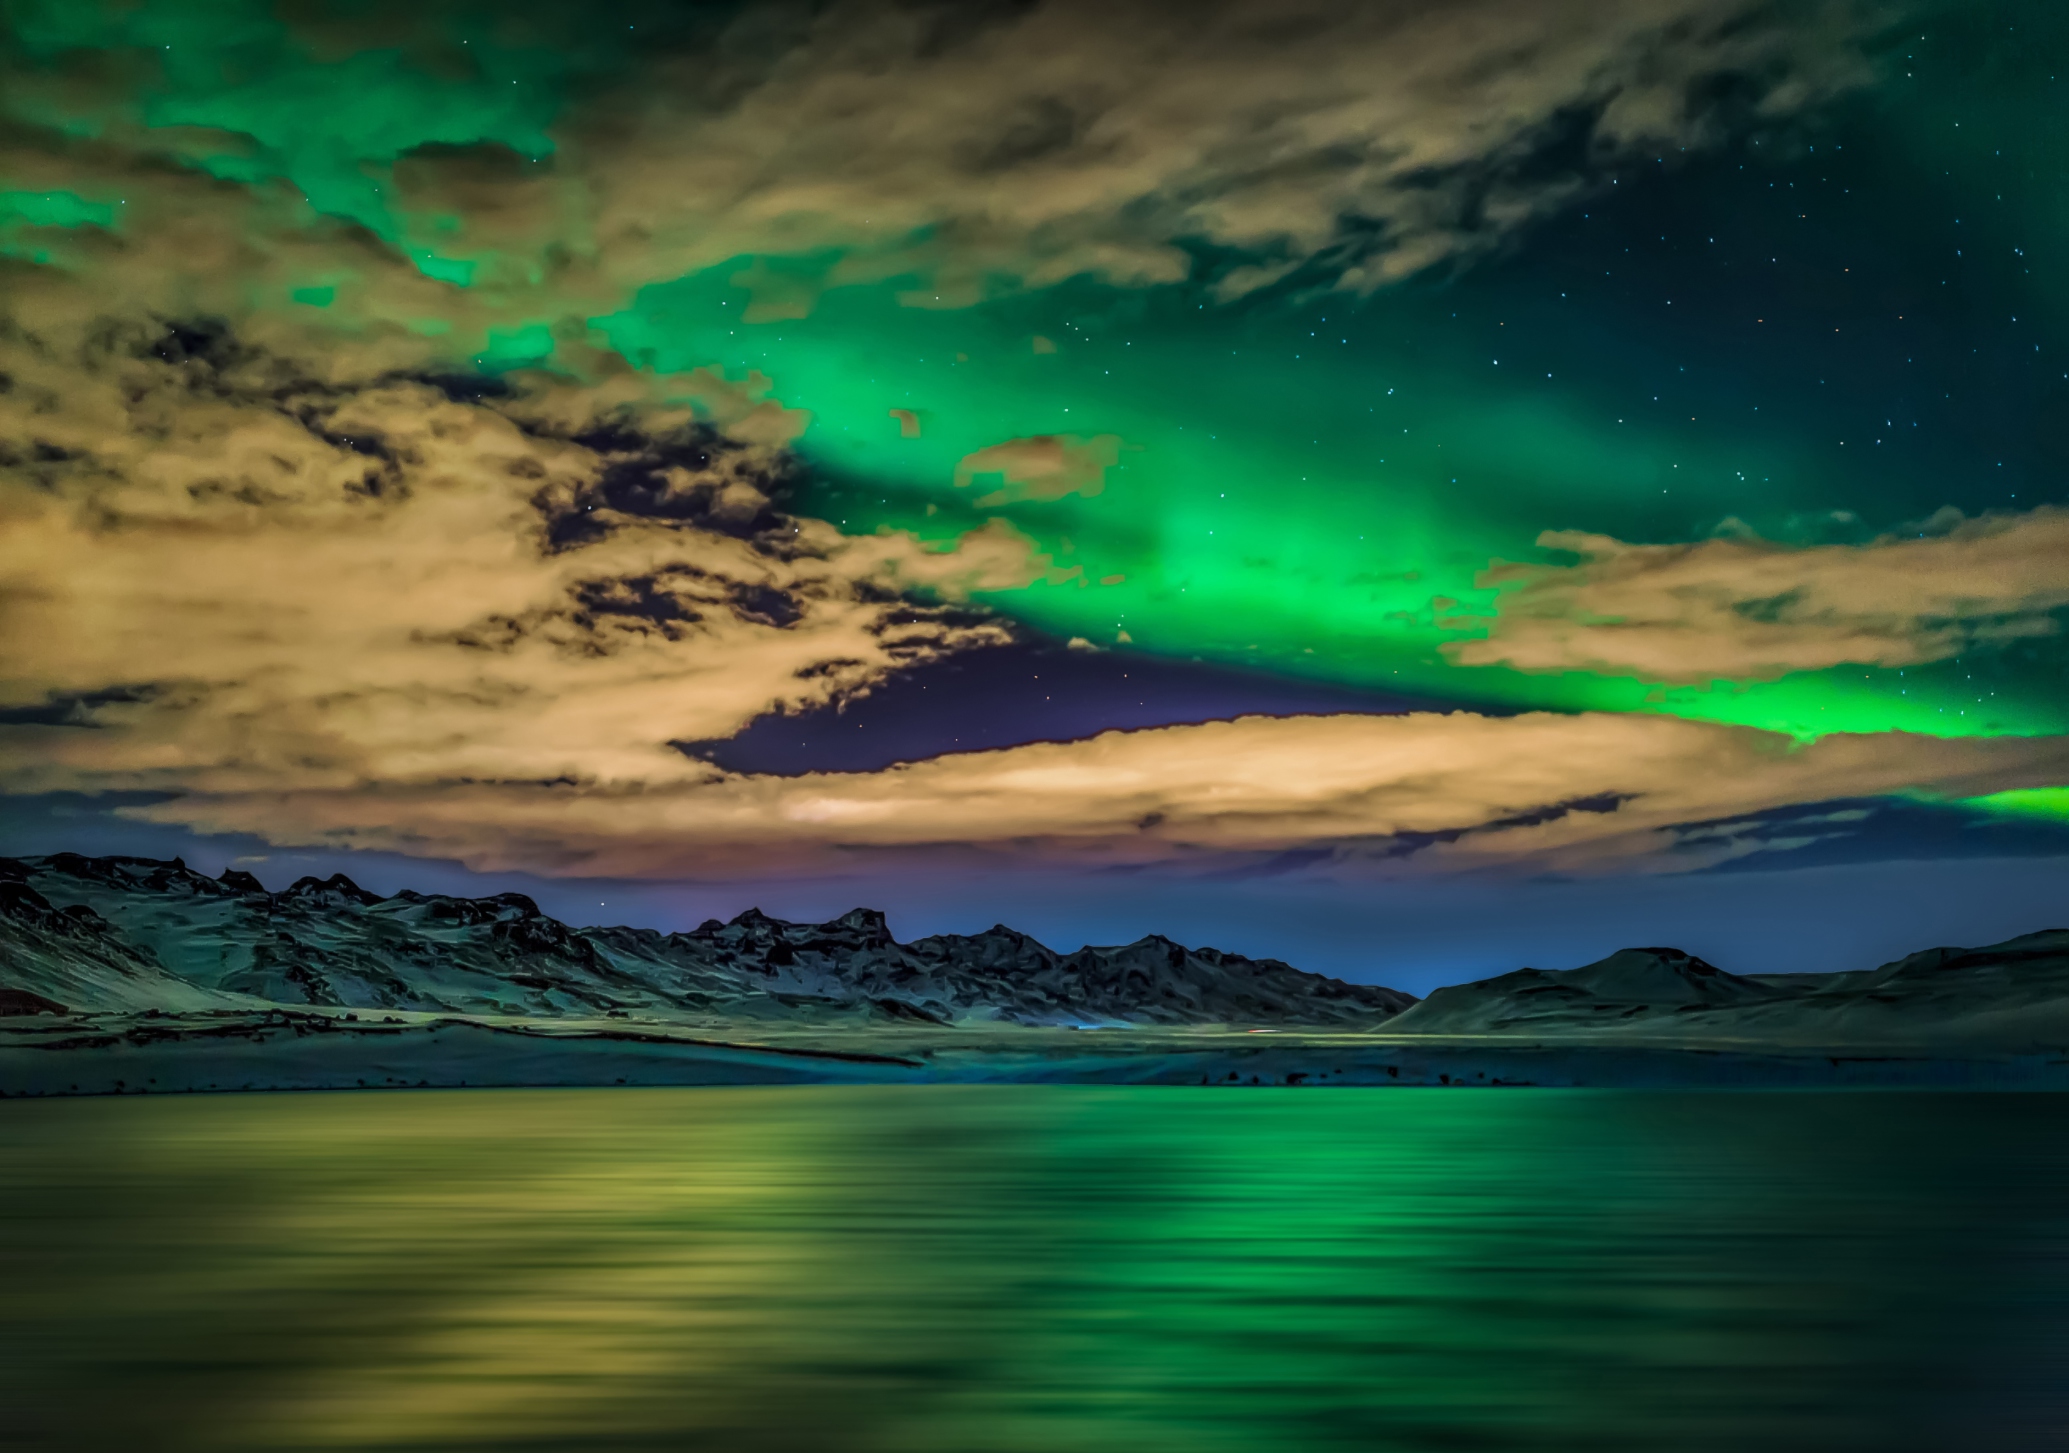 The Northern Lights over Kleifarvatn lake, on the Reykjanes Peninsula. Image by Ragnar Th. Sigurdsson / age fotostock / Getty